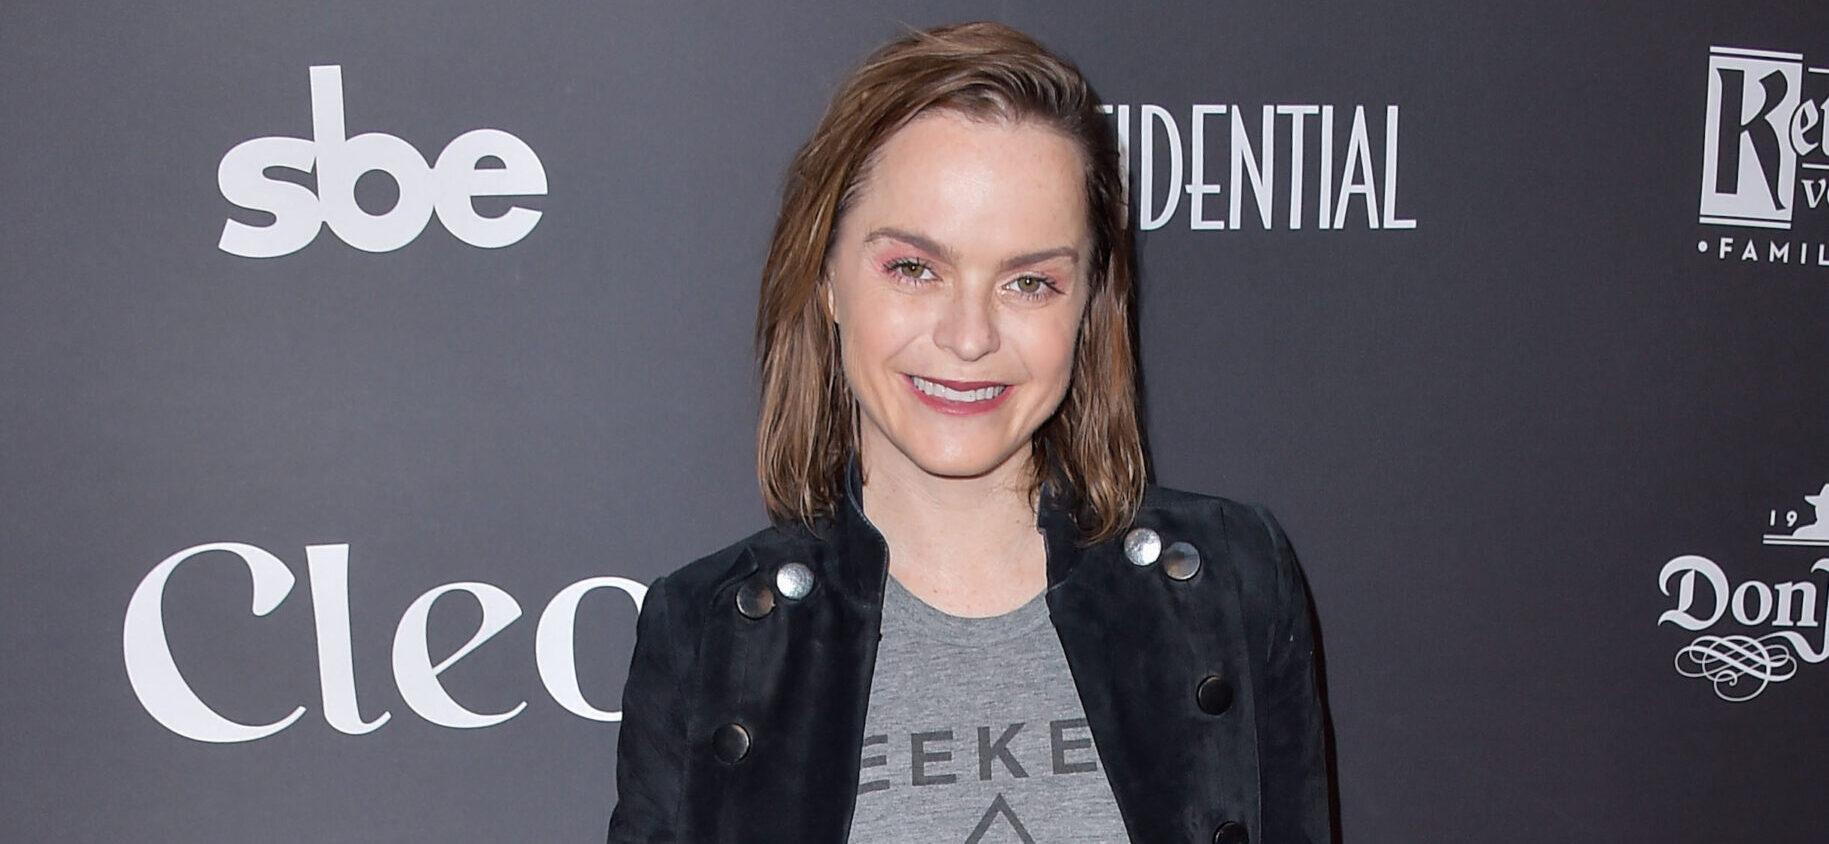 Taryn Manning Raises Concerns After Unusual Outing In Underwear Amid Support Of Danny Masterson